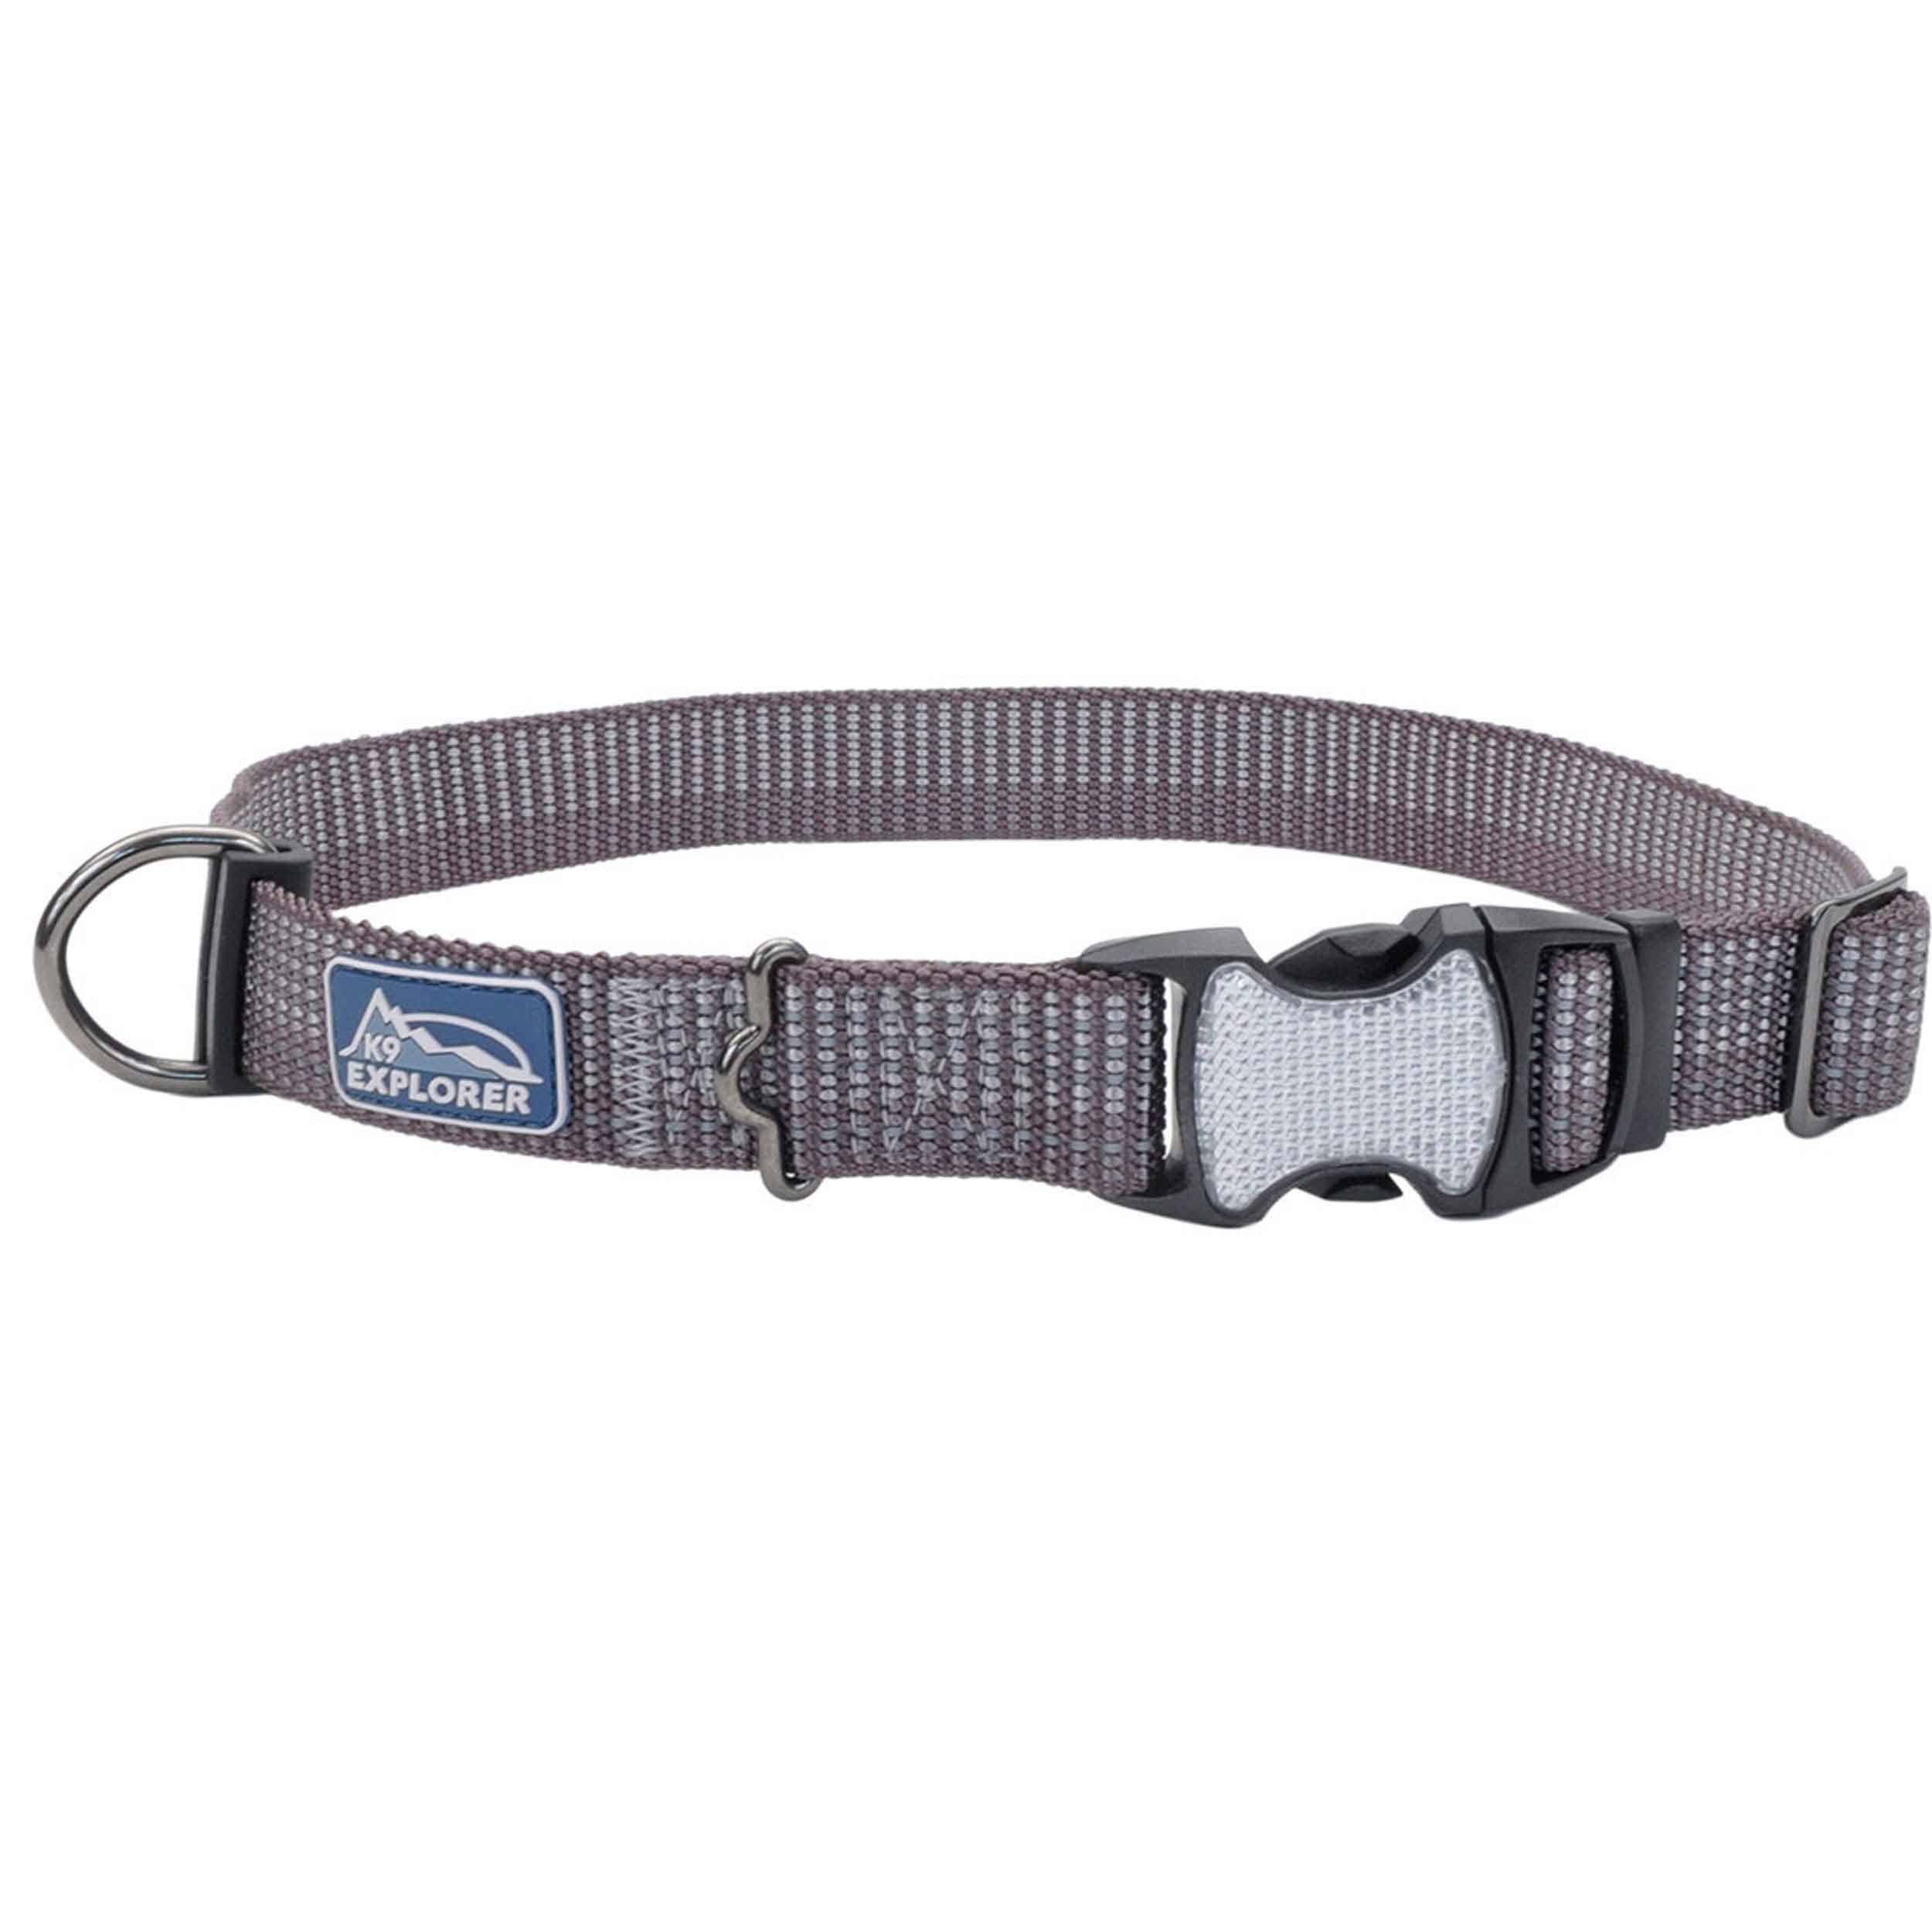 K9 Explorer Brights Reflective Adjustable Dog Collar, Mountain, 1-in x 12-18-in